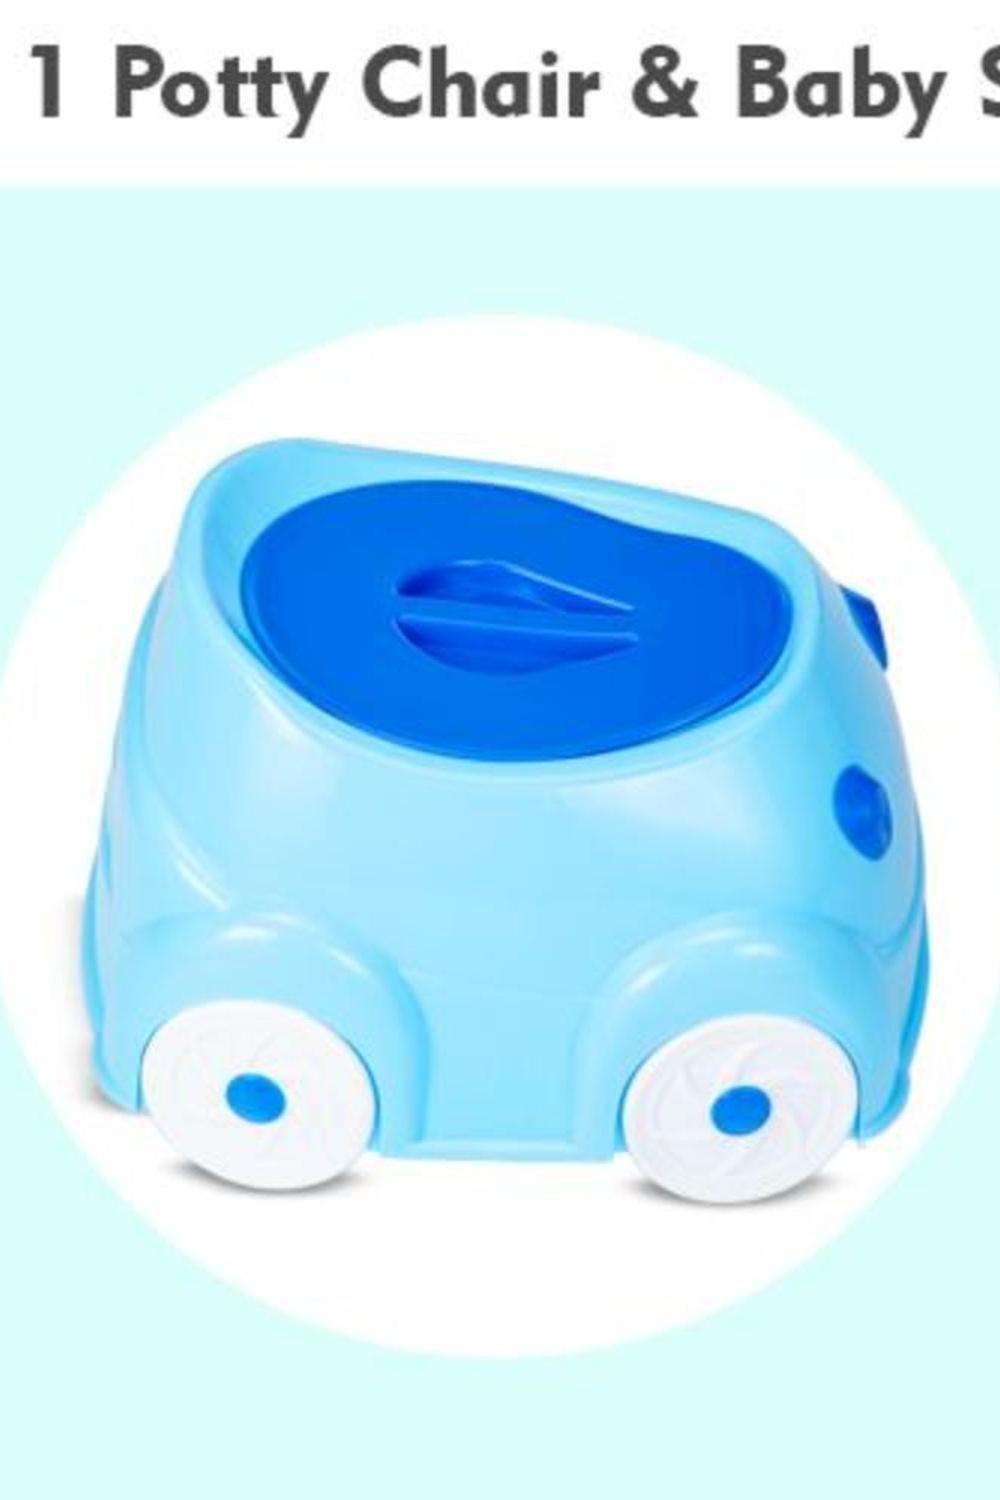 Mee Mee 2 In 1 Potty Chair & Baby Seat | Car Shaped Kids Potty Chair